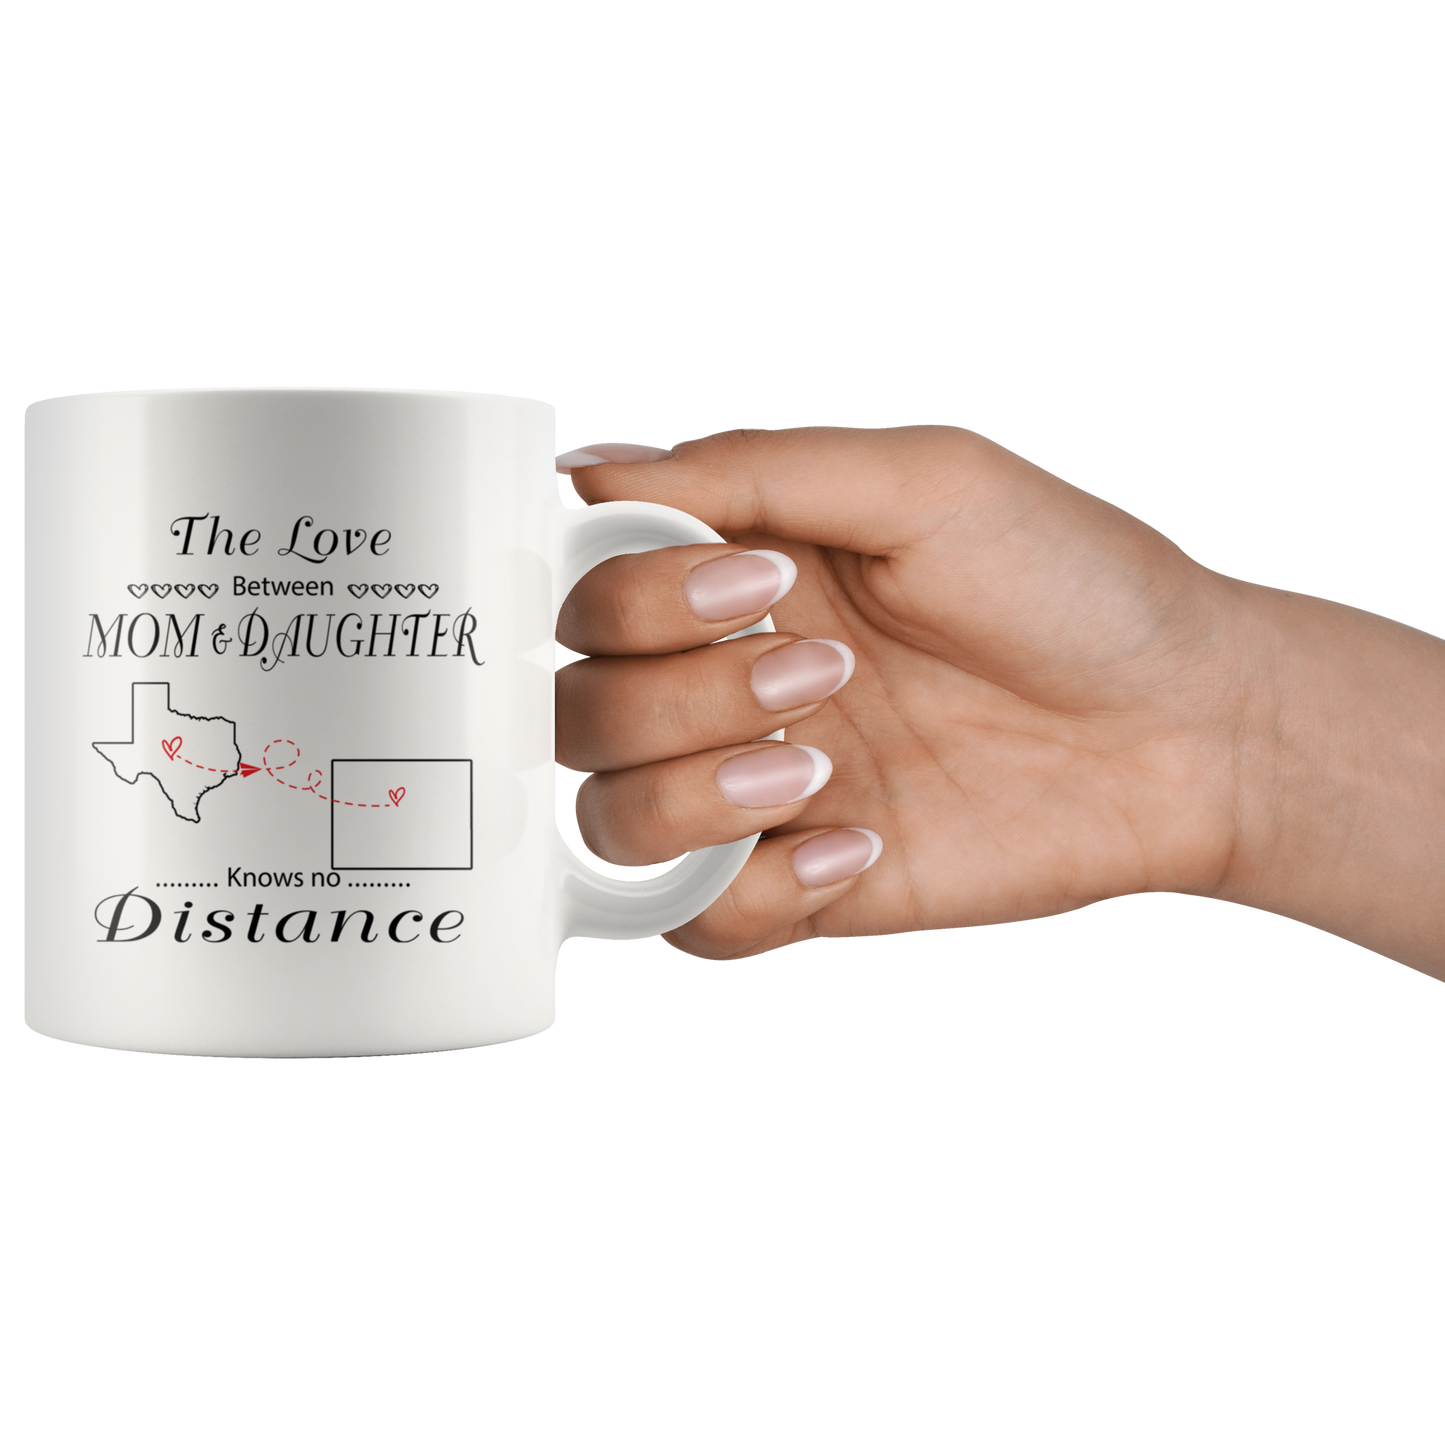 M-20618345-sp-24101 - [ Texas | Wyoming ]Mother Daughter Distance Mug Texas Wyoming The Love Between